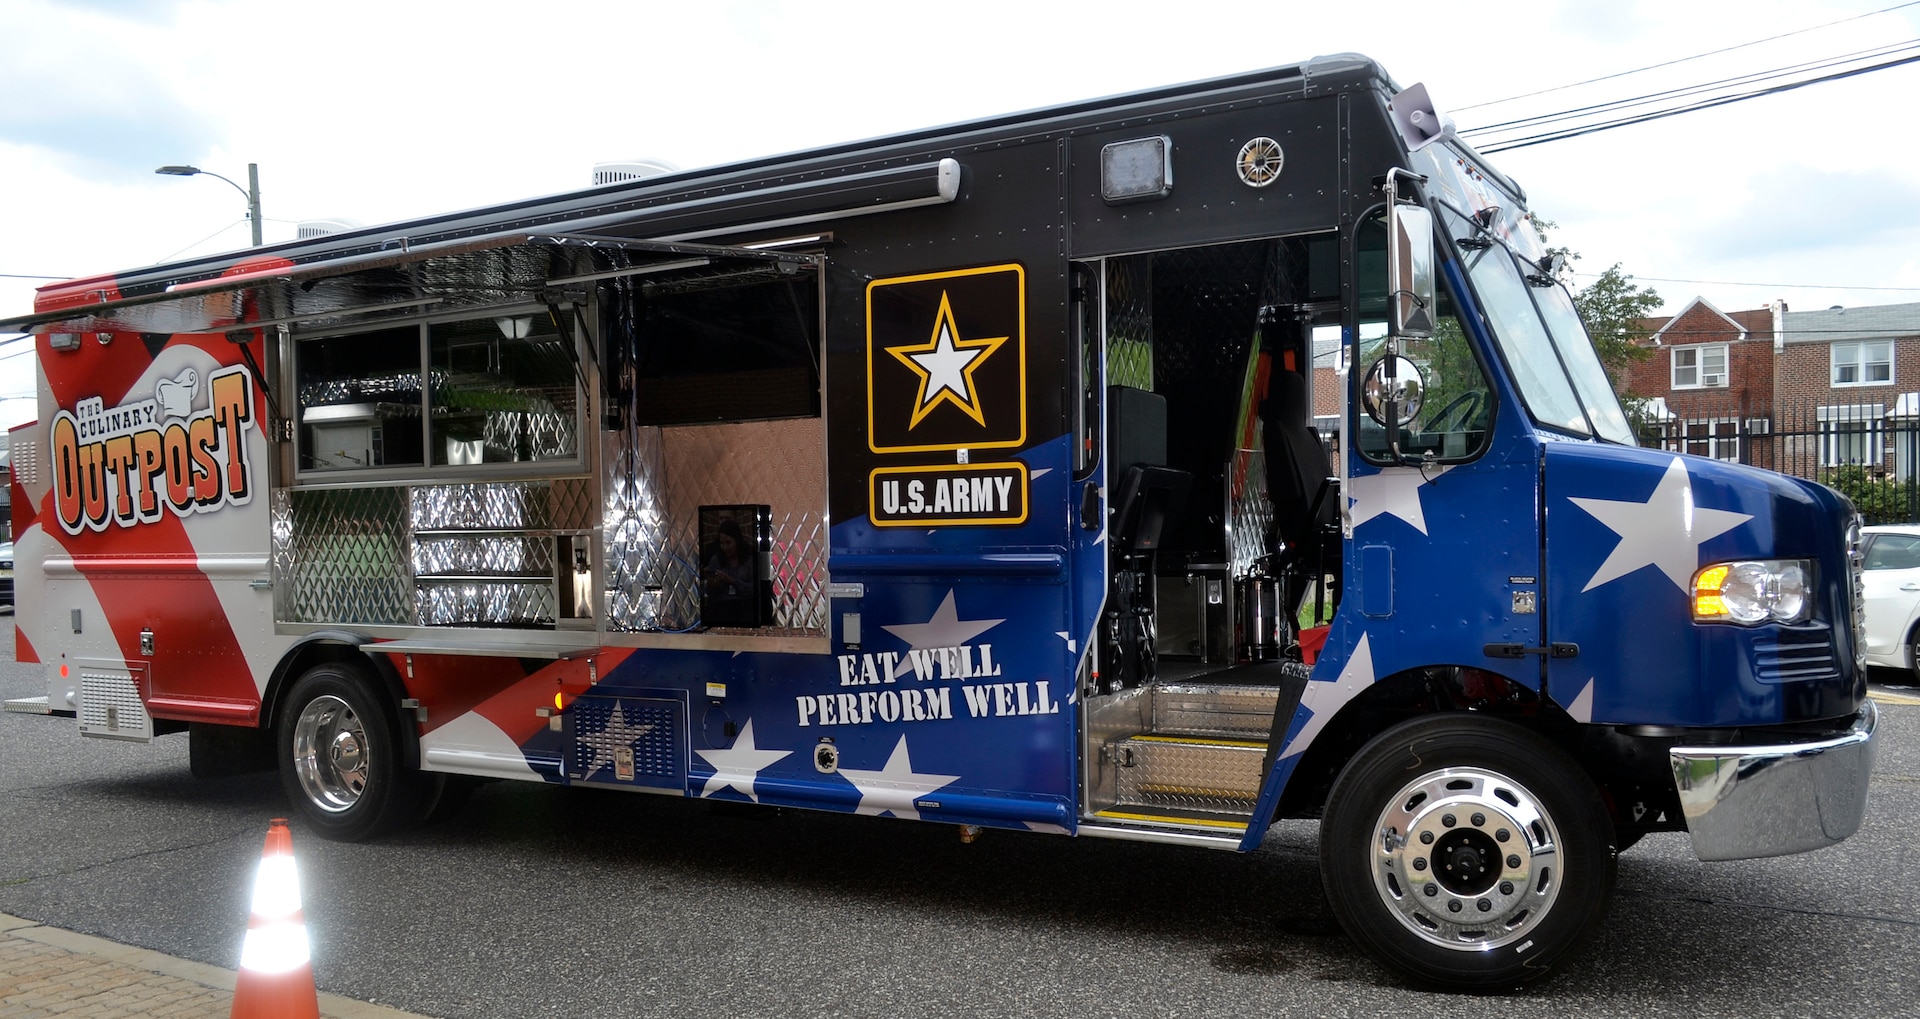 A new food truck purchased by the Defense Logistics Agency Troop Support for the Army's Joint Center of Culinary Excellence stopped at the DLA headquarters in Philadelphia on July 9, 2019.